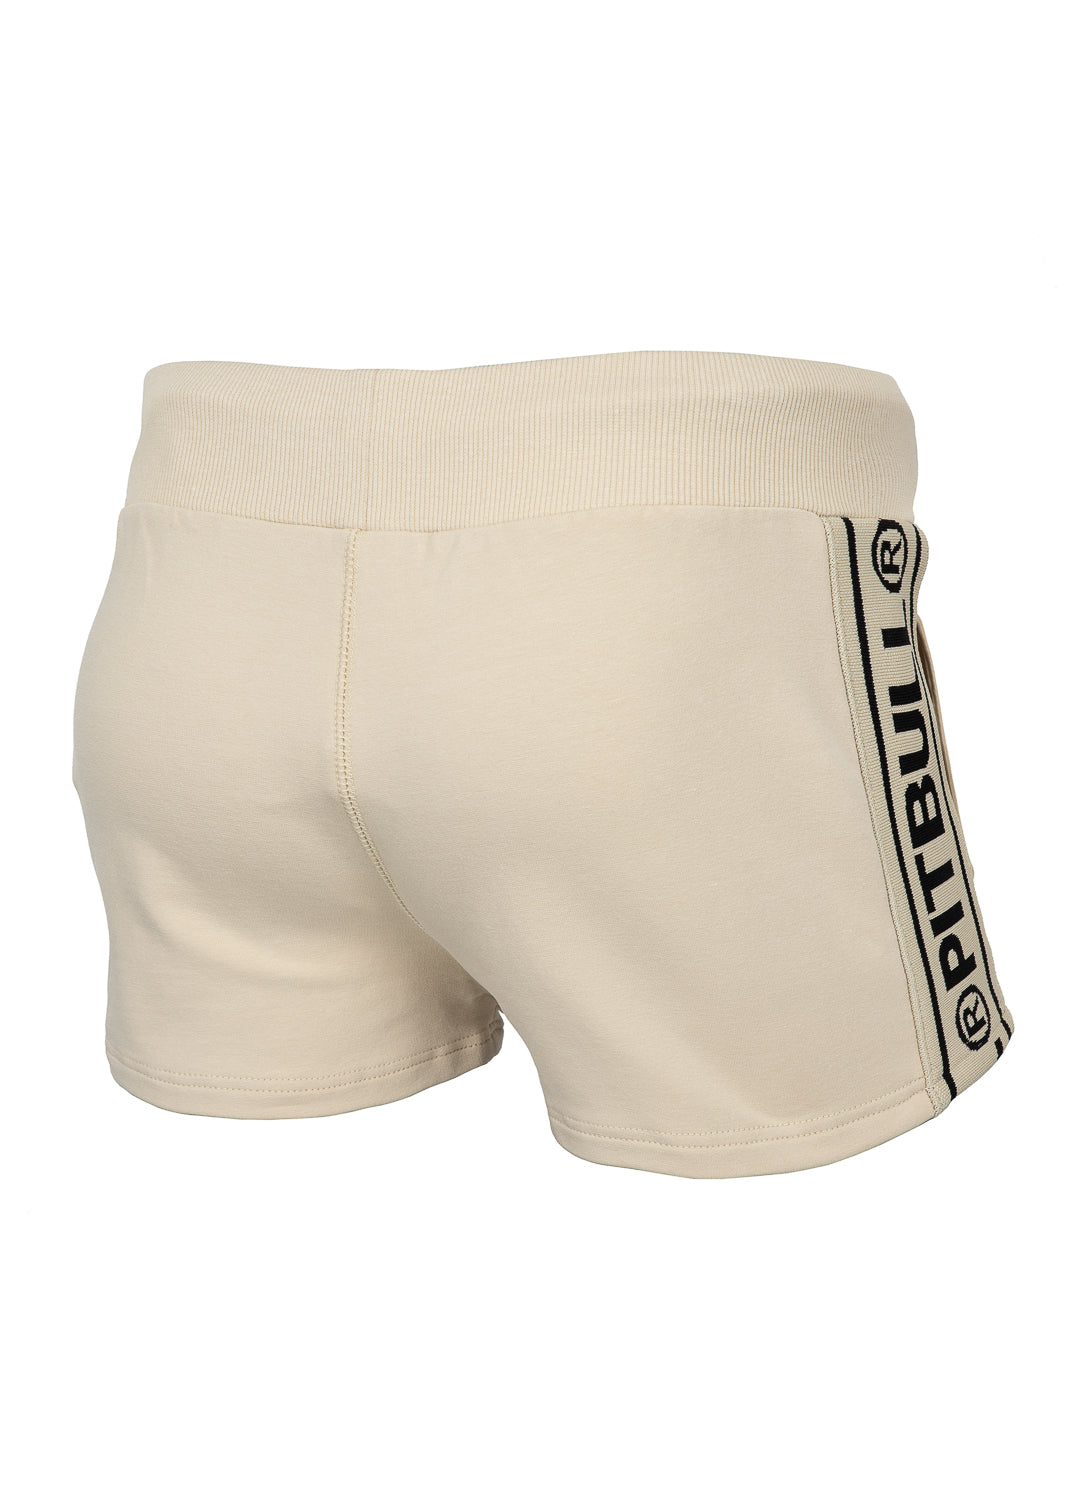 GLORIA French Terry Sand Shorts.